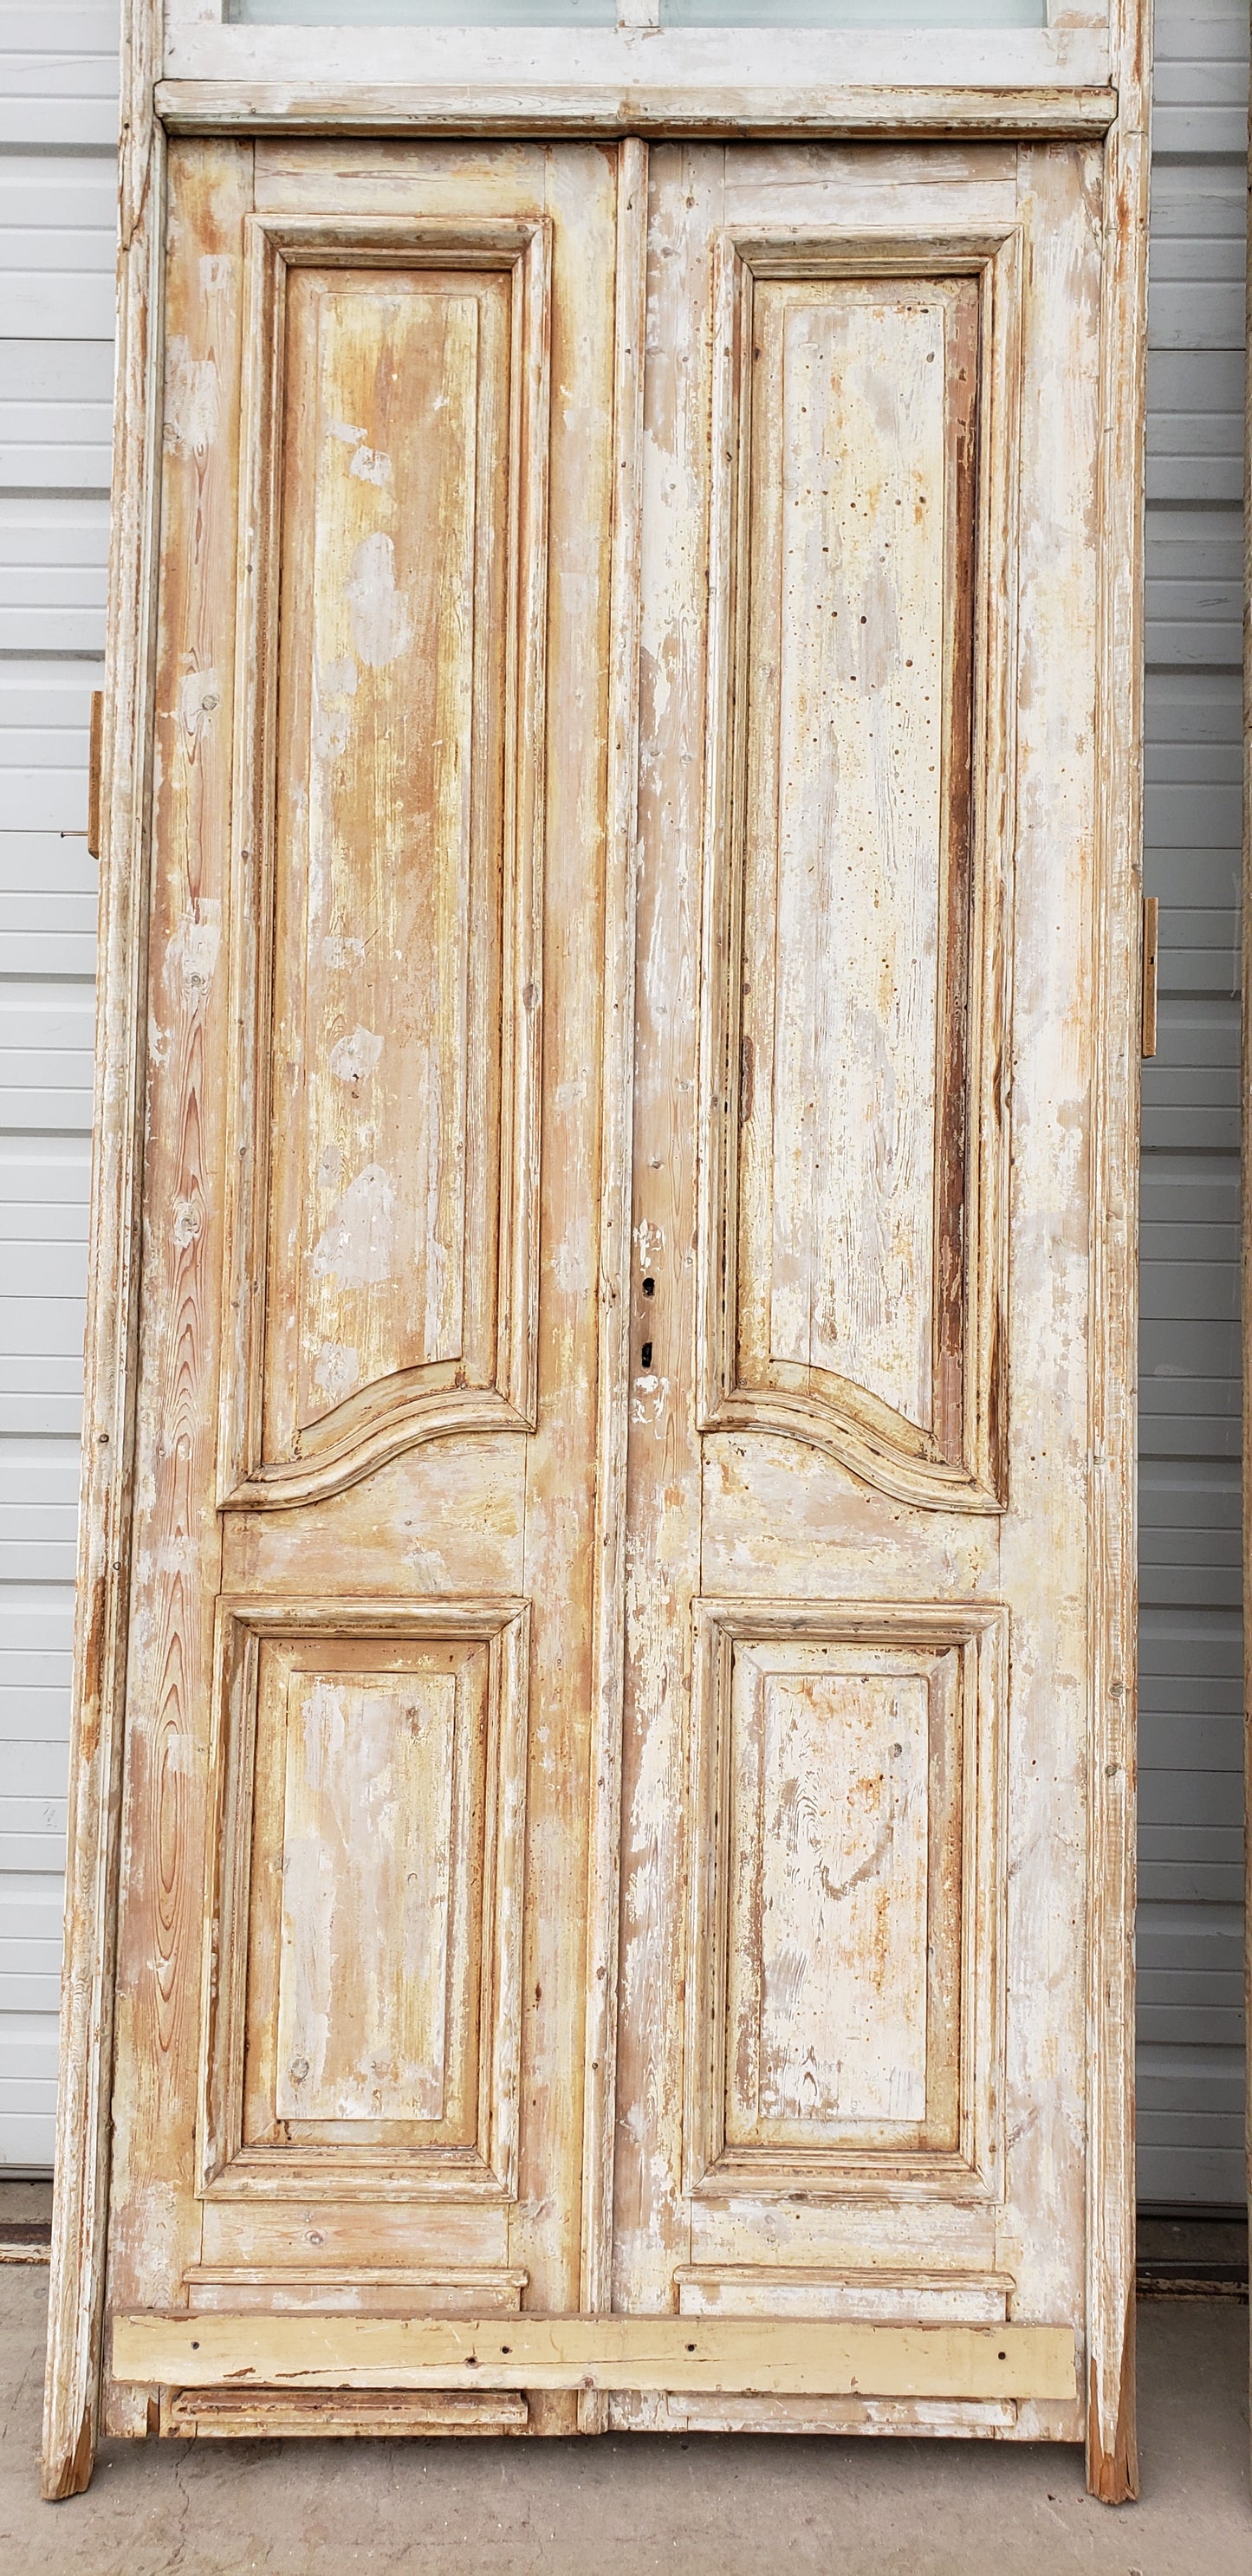 Pair of Framed 3 Panel Distressed Antique Doors with Circle Transom